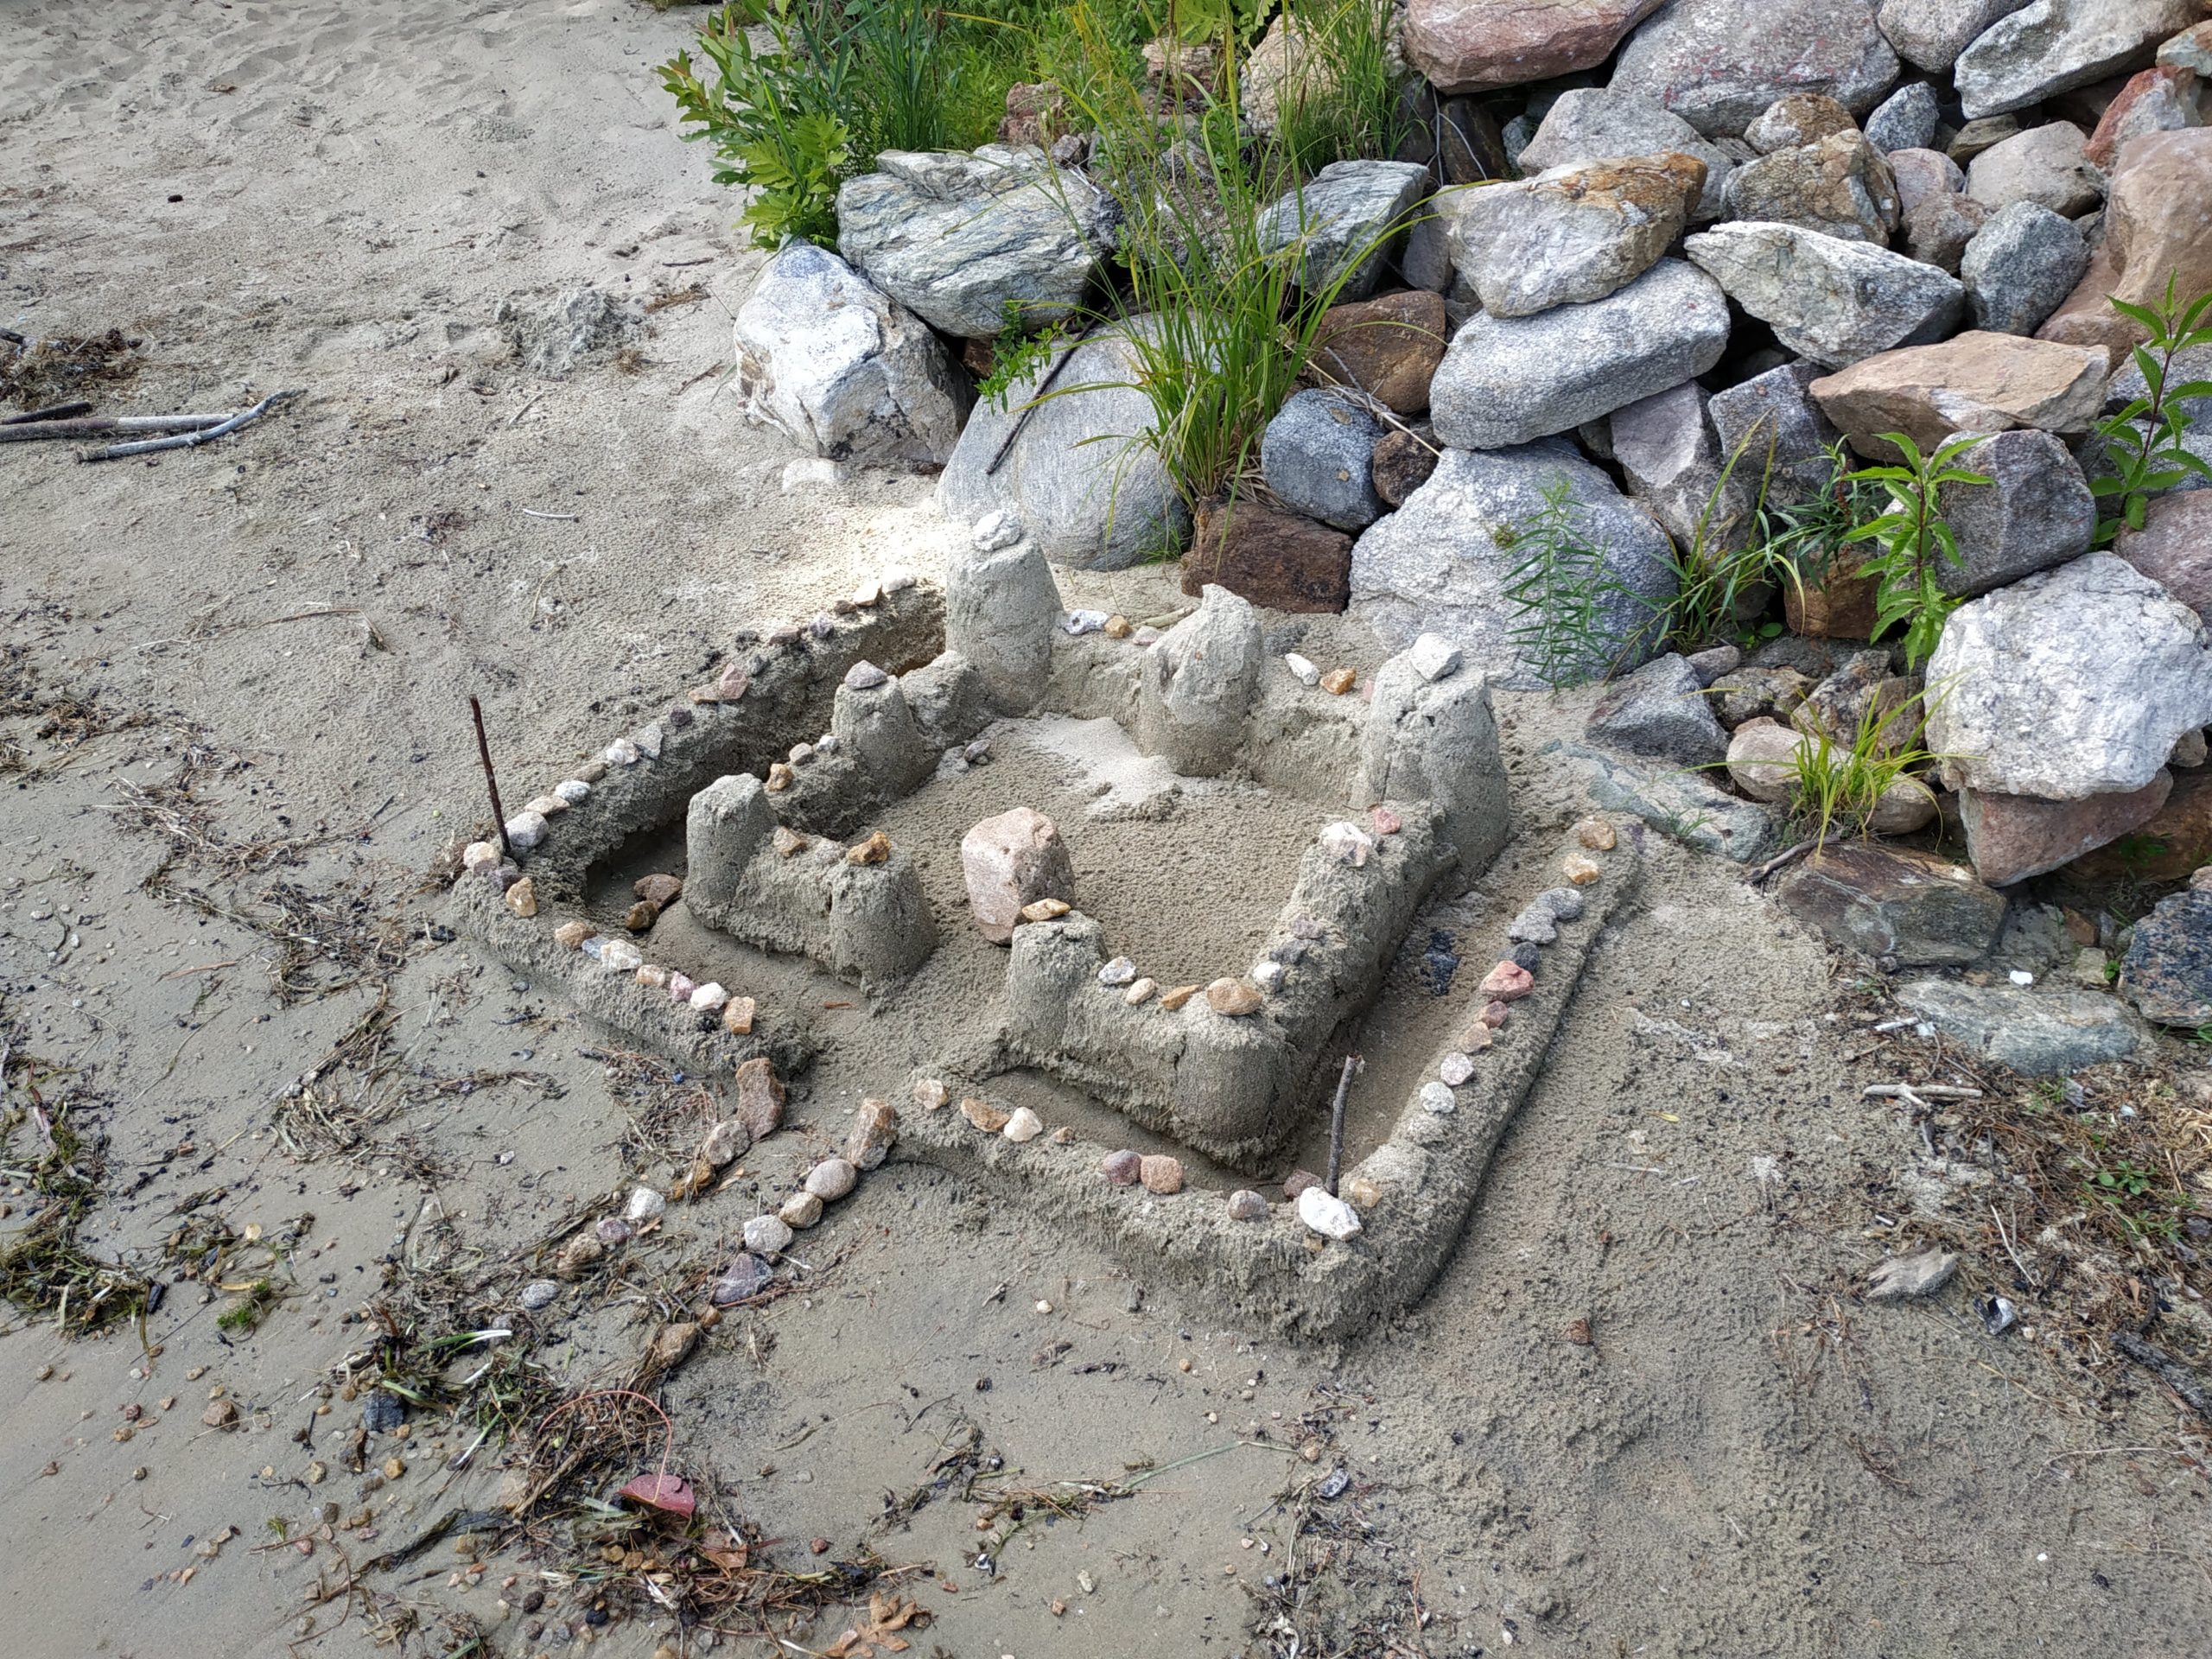 Can you beat this sand castle?